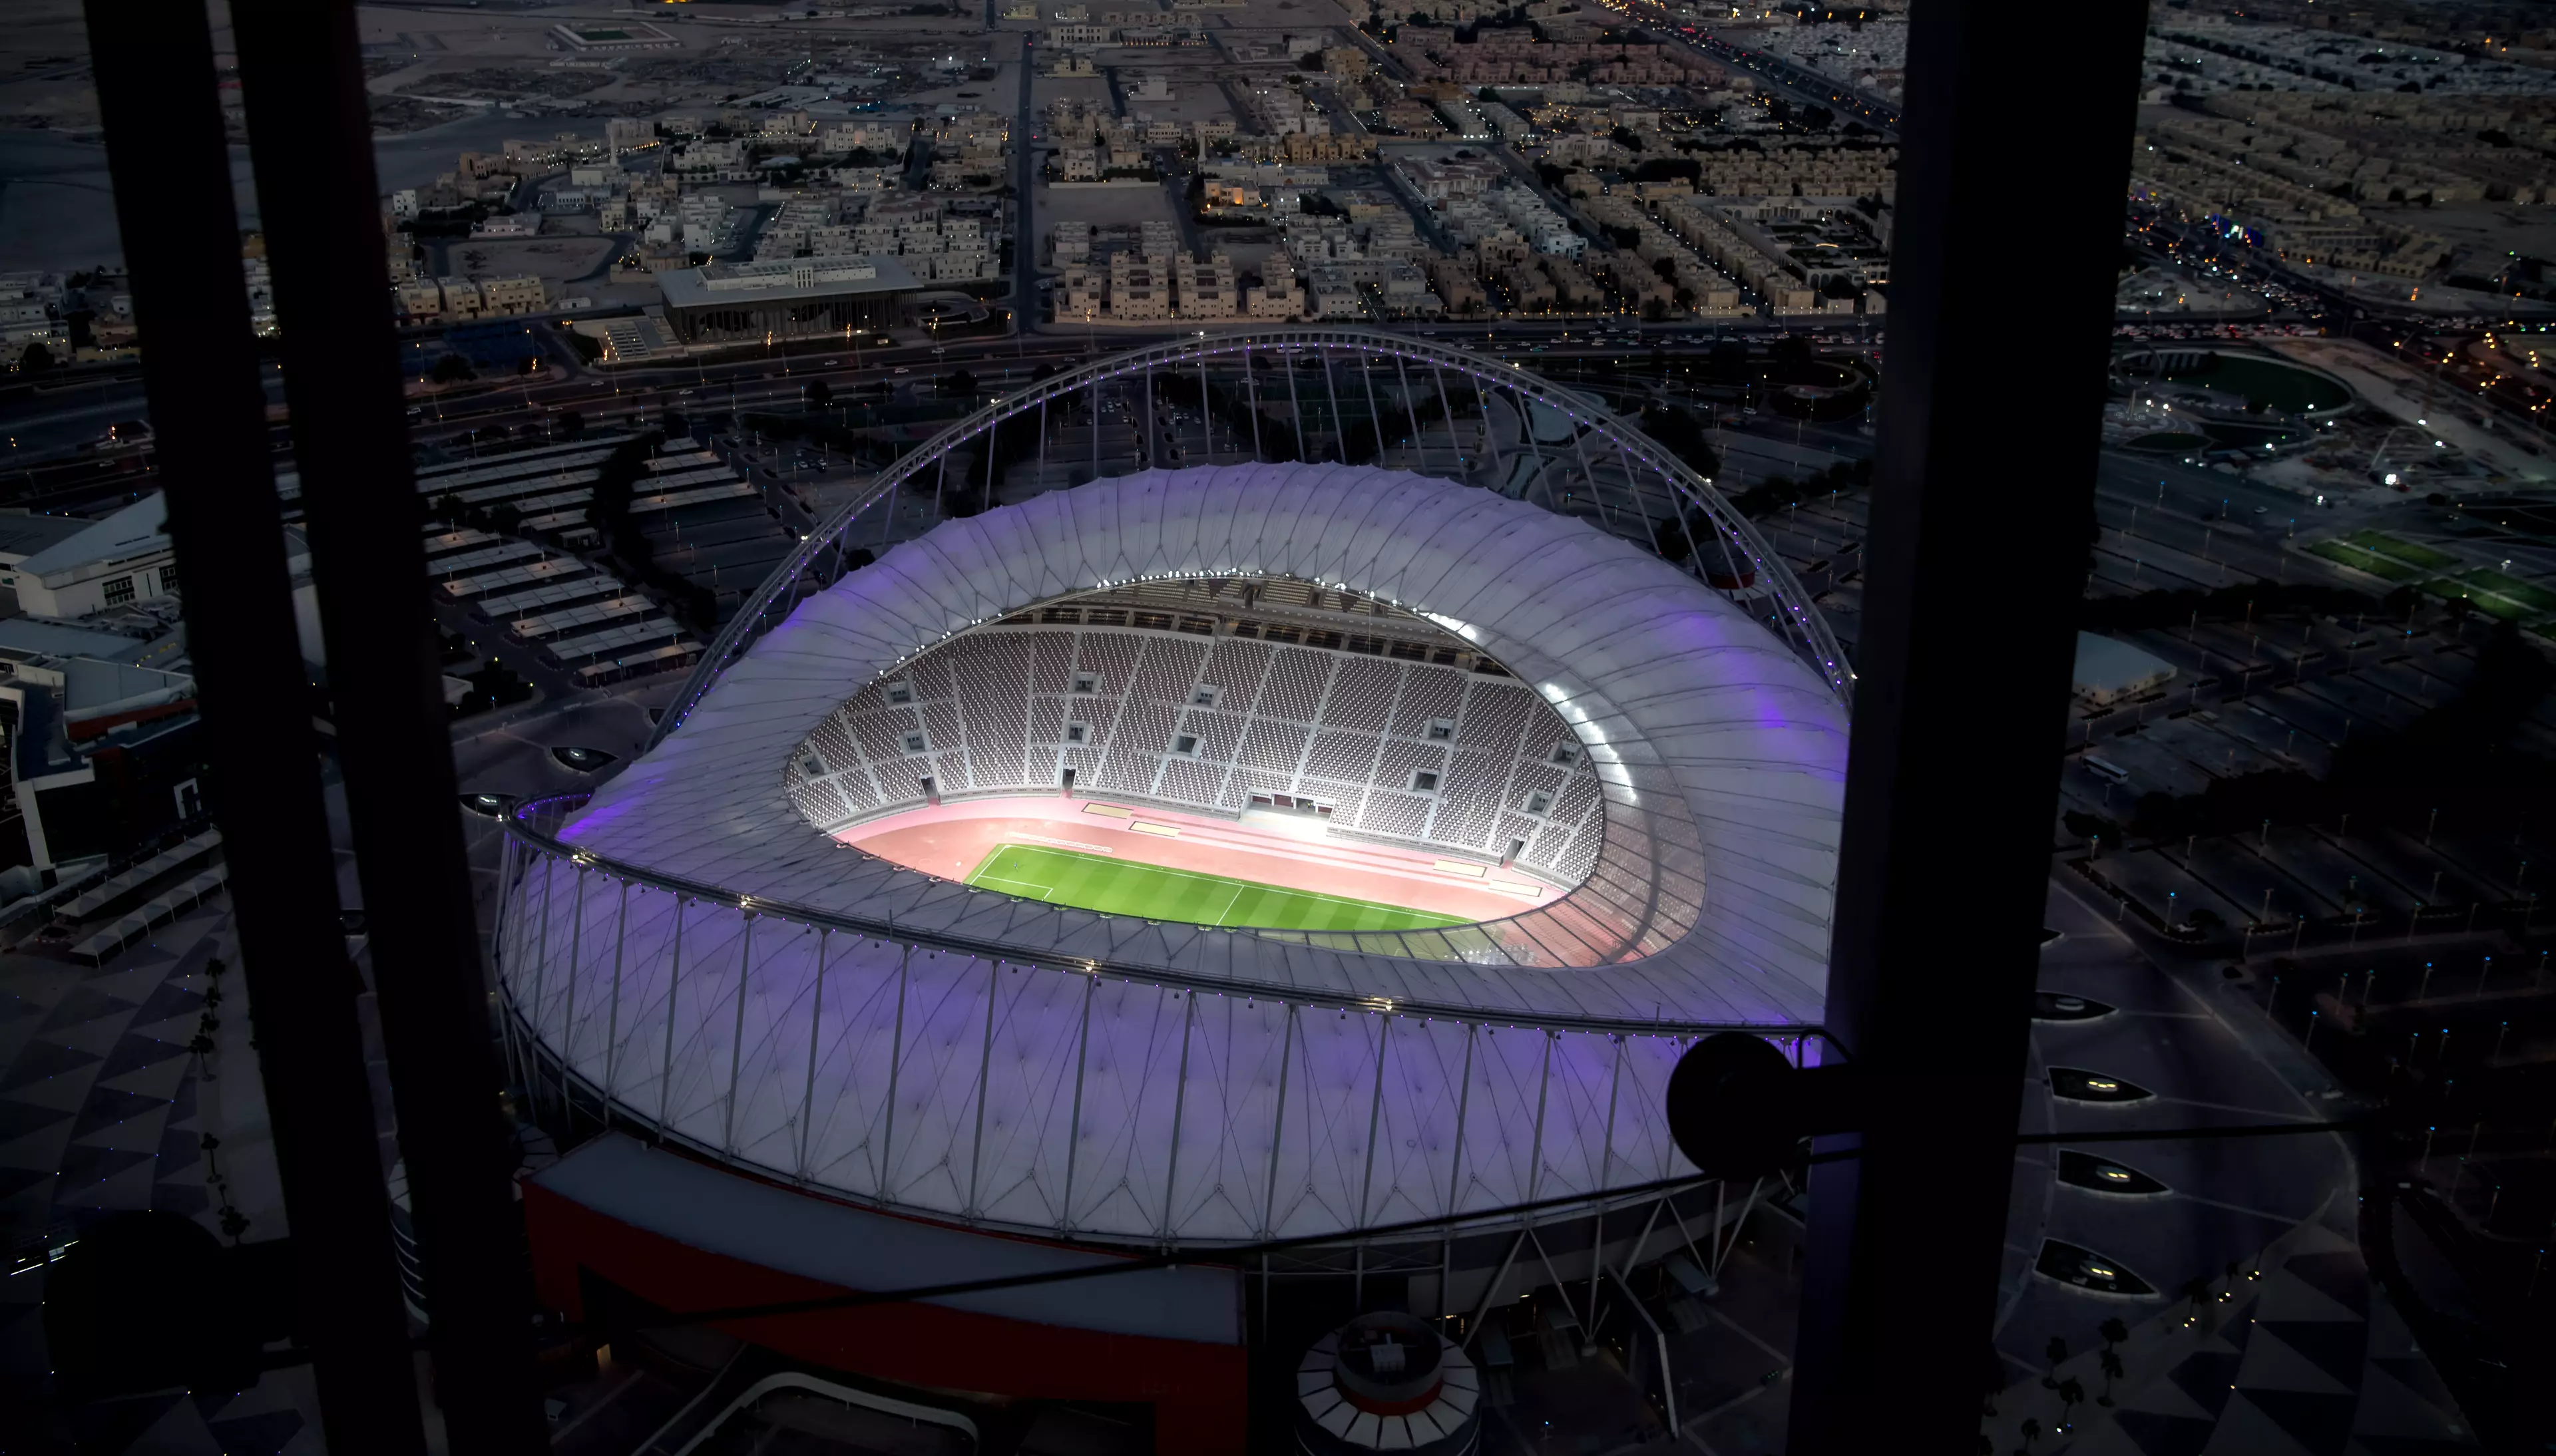 The Khalifa International Stadium in Doha will host the final in December 2022. Image: PA Images